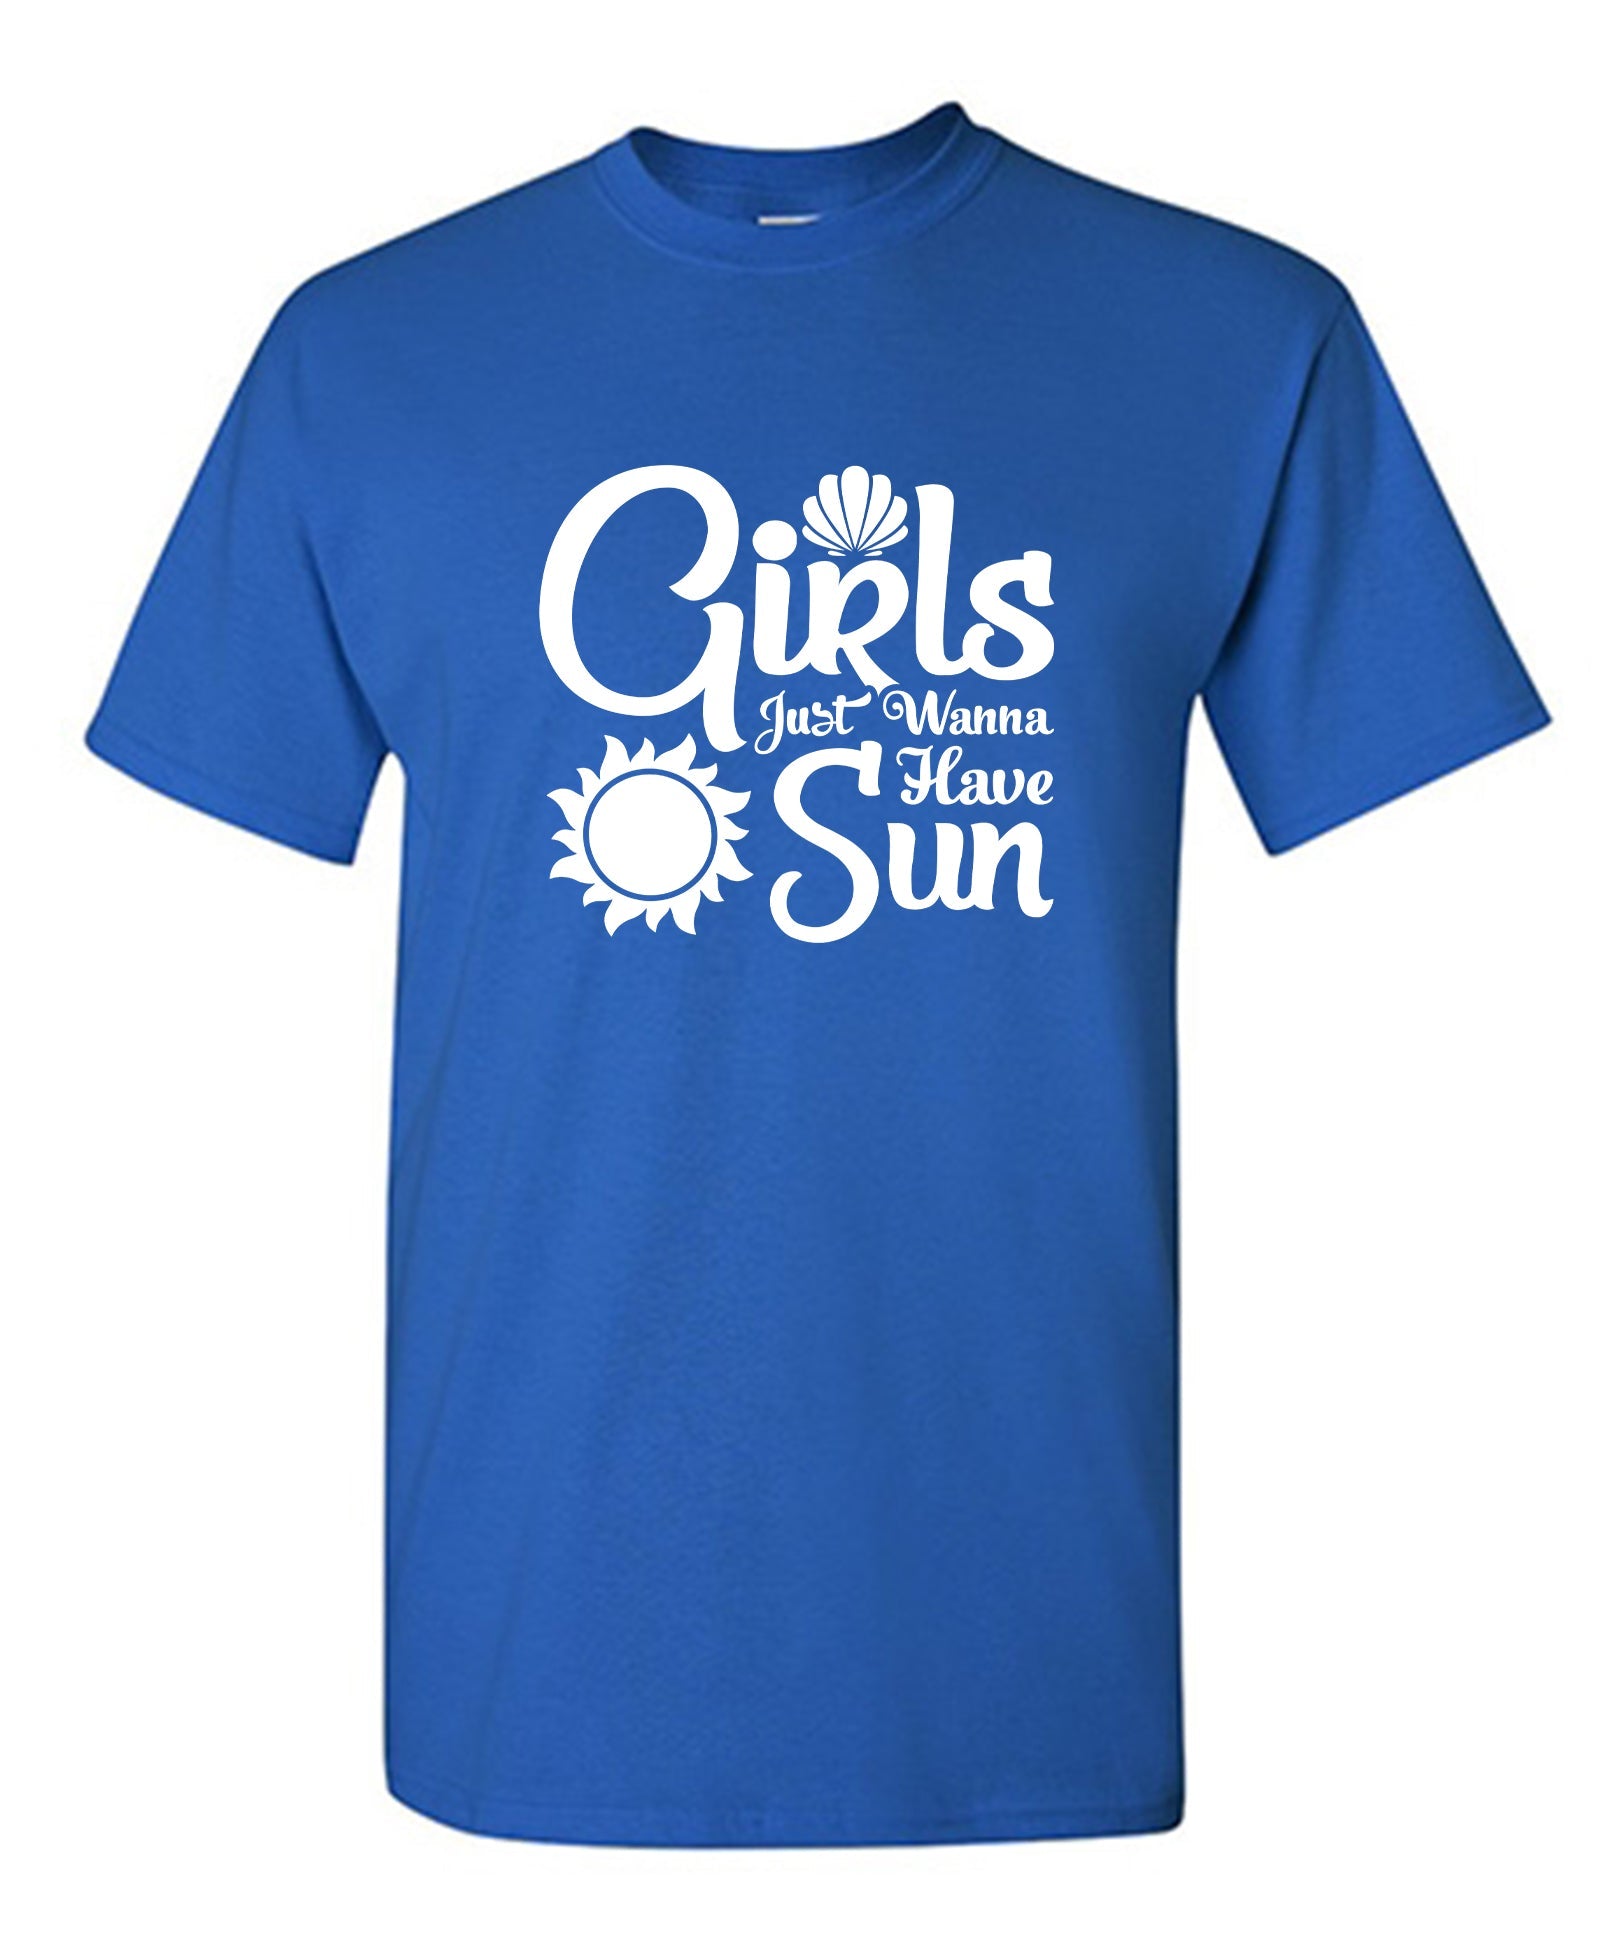 Girls Just Wanna Have Sun - Funny T Shirts & Graphic Tees